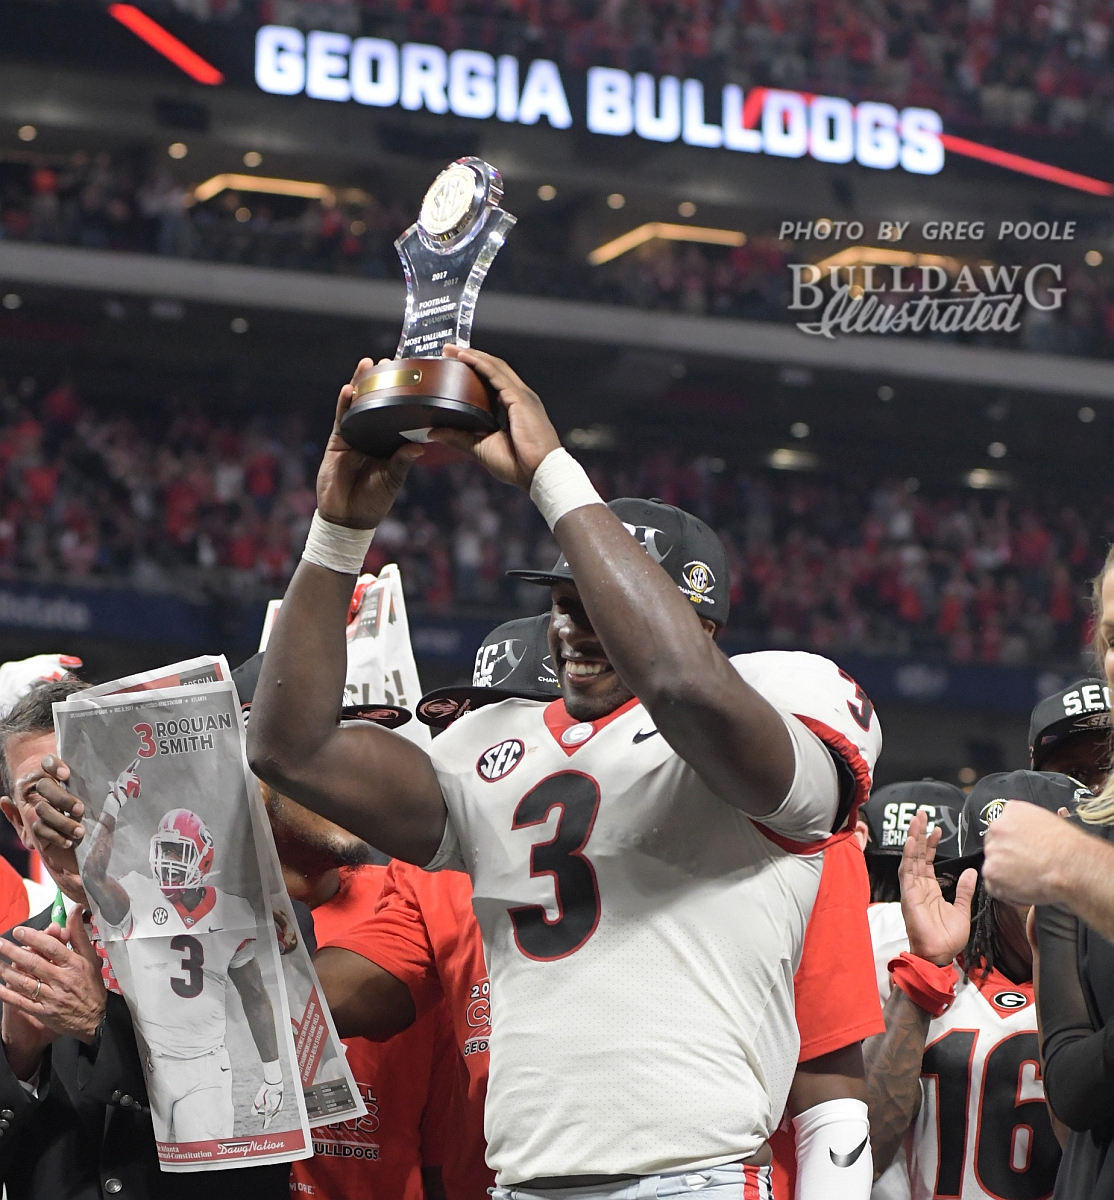 Roquan Smith receives the MVP trophy for his outstanding defensive performance in the 2017 SEC Championship, where Georgia defeated Auburn 28-7.  - Saturday, Dec. 2, 2017 - Mercedes-Benz Stadium, Atlanta, GA - 